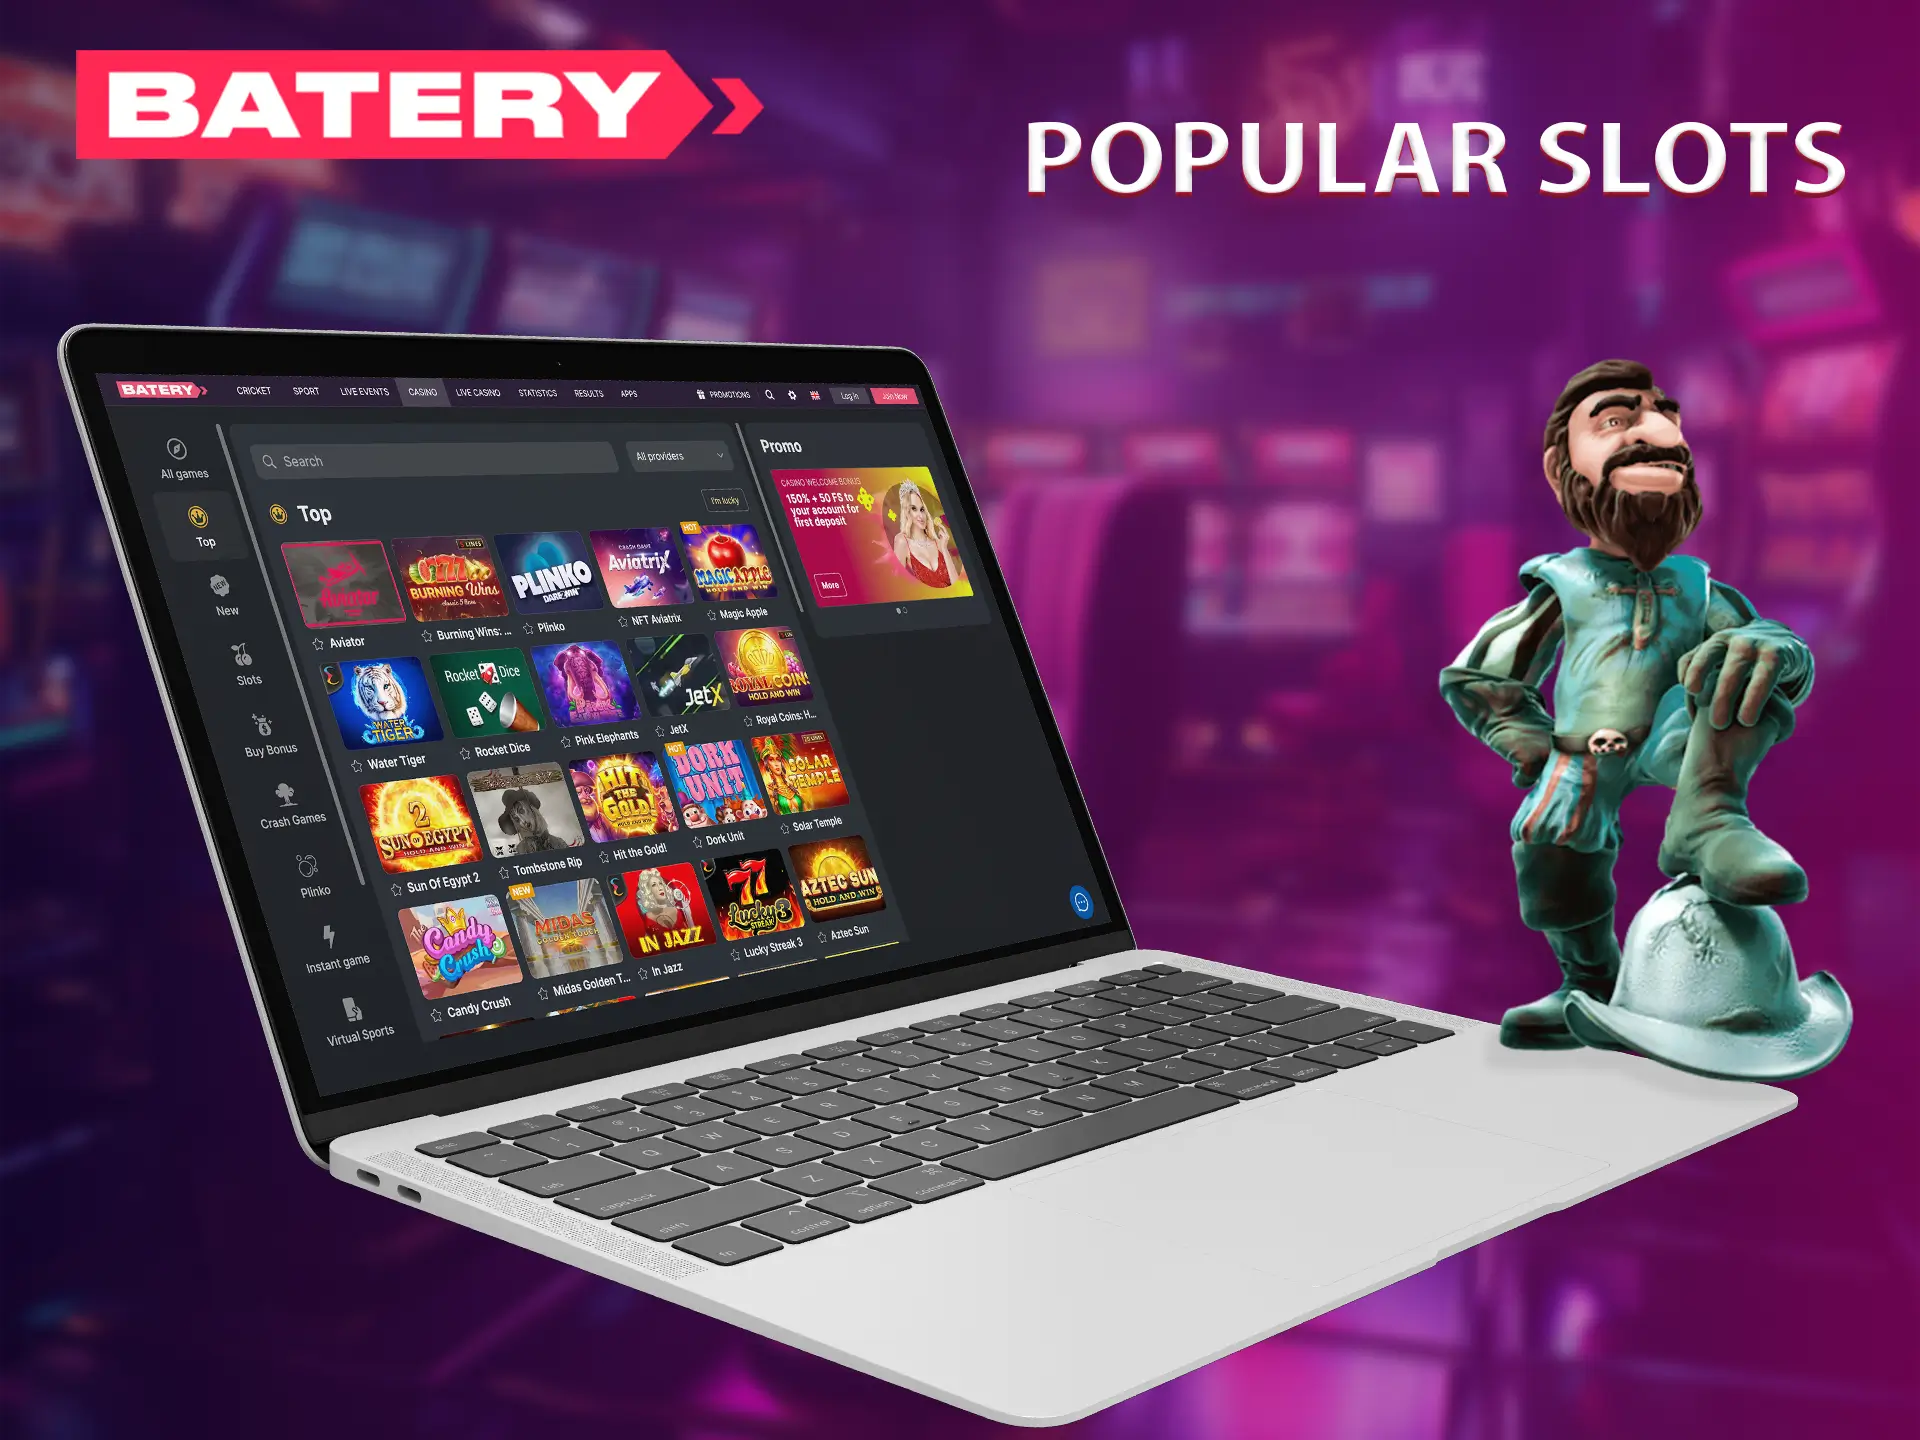 Play and win at Batery's most famous casino games.